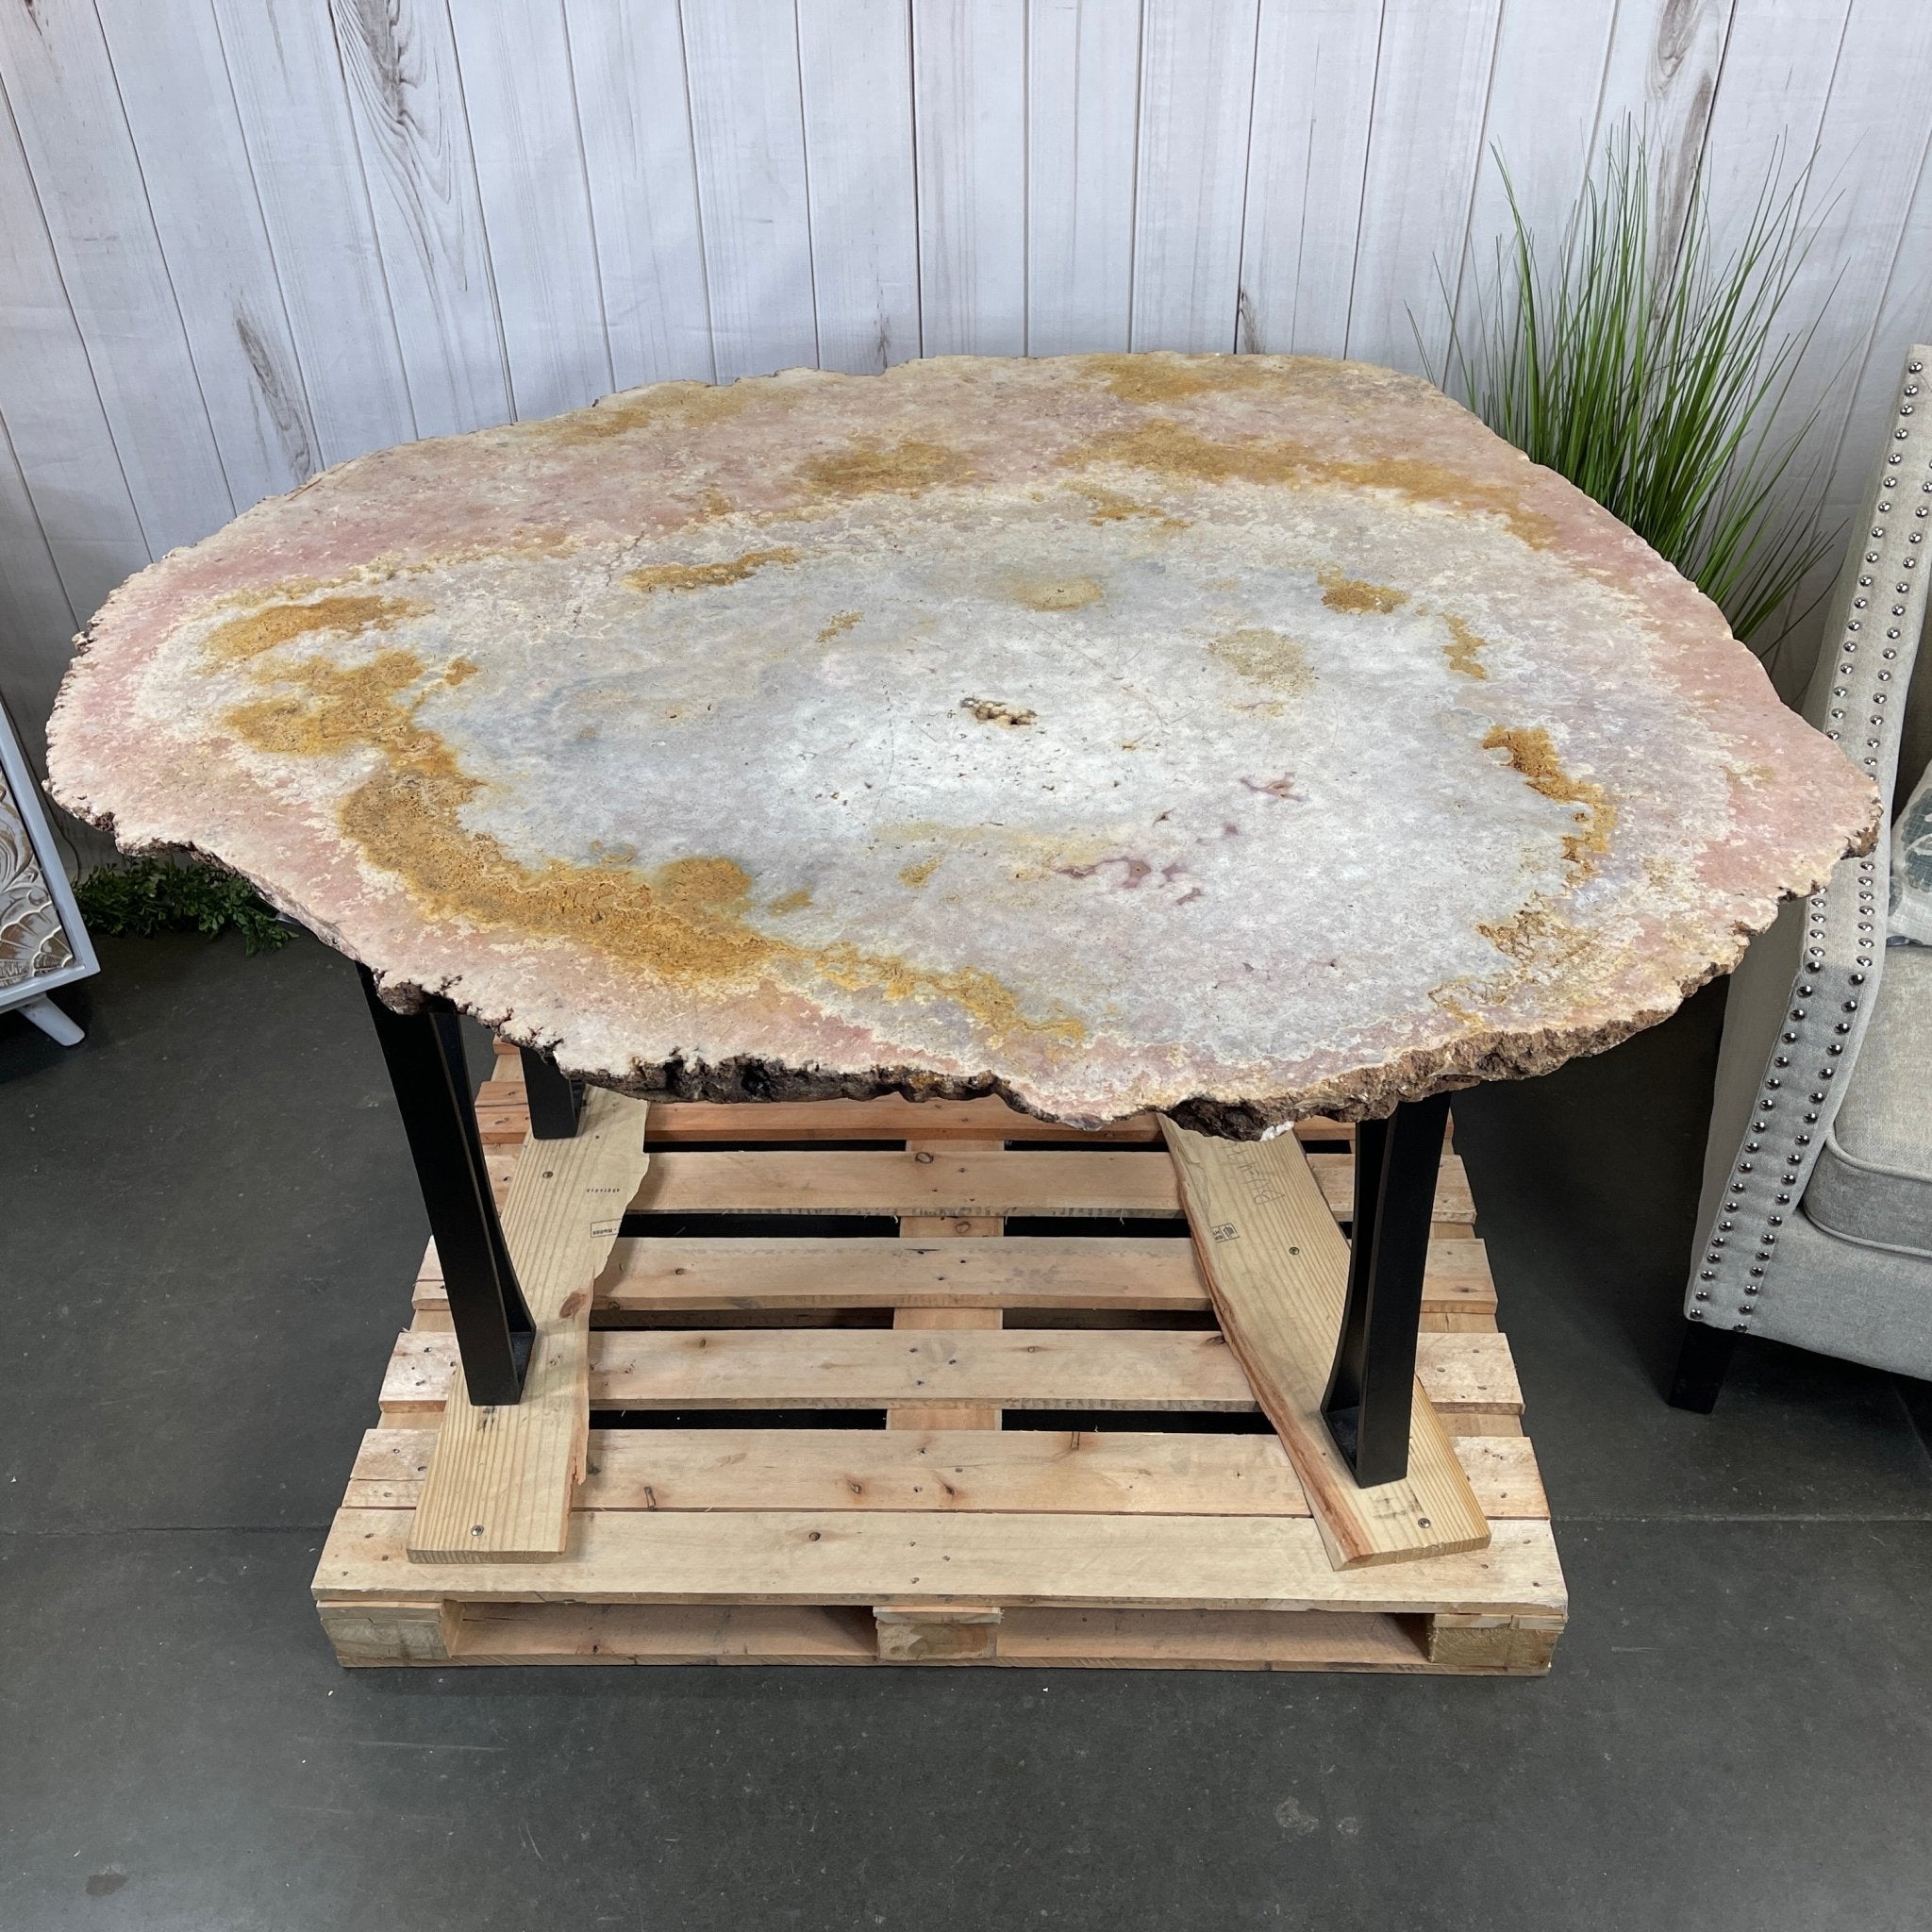 Special Pink Amethyst Dining/Conference Room Table Super Quality, 992.3 lbs & 58.8" long #1380-0001 - Brazil GemsBrazil GemsSpecial Pink Amethyst Dining/Conference Room Table Super Quality, 992.3 lbs & 58.8" long #1380-0001Tables: Dining1380-0001